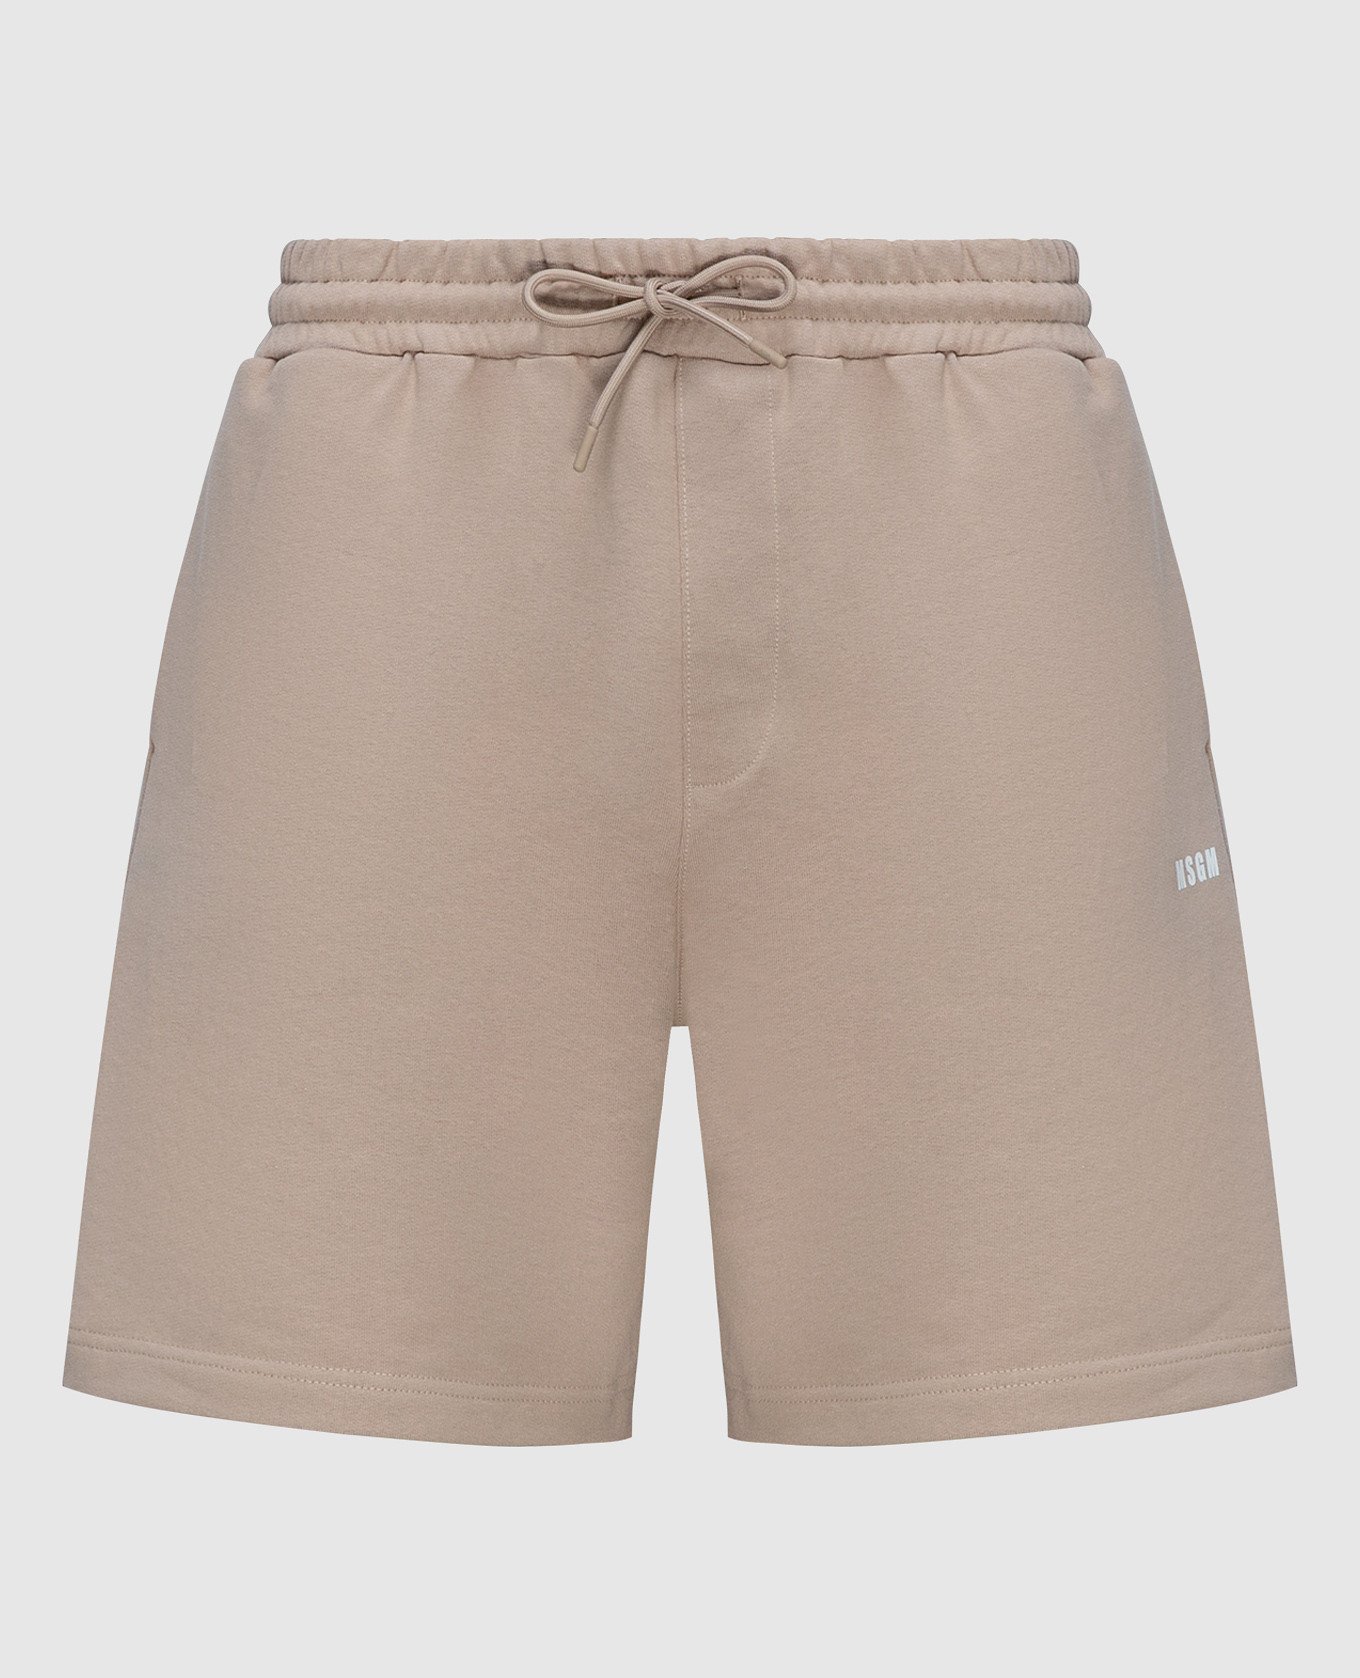 Beige shorts with logo print